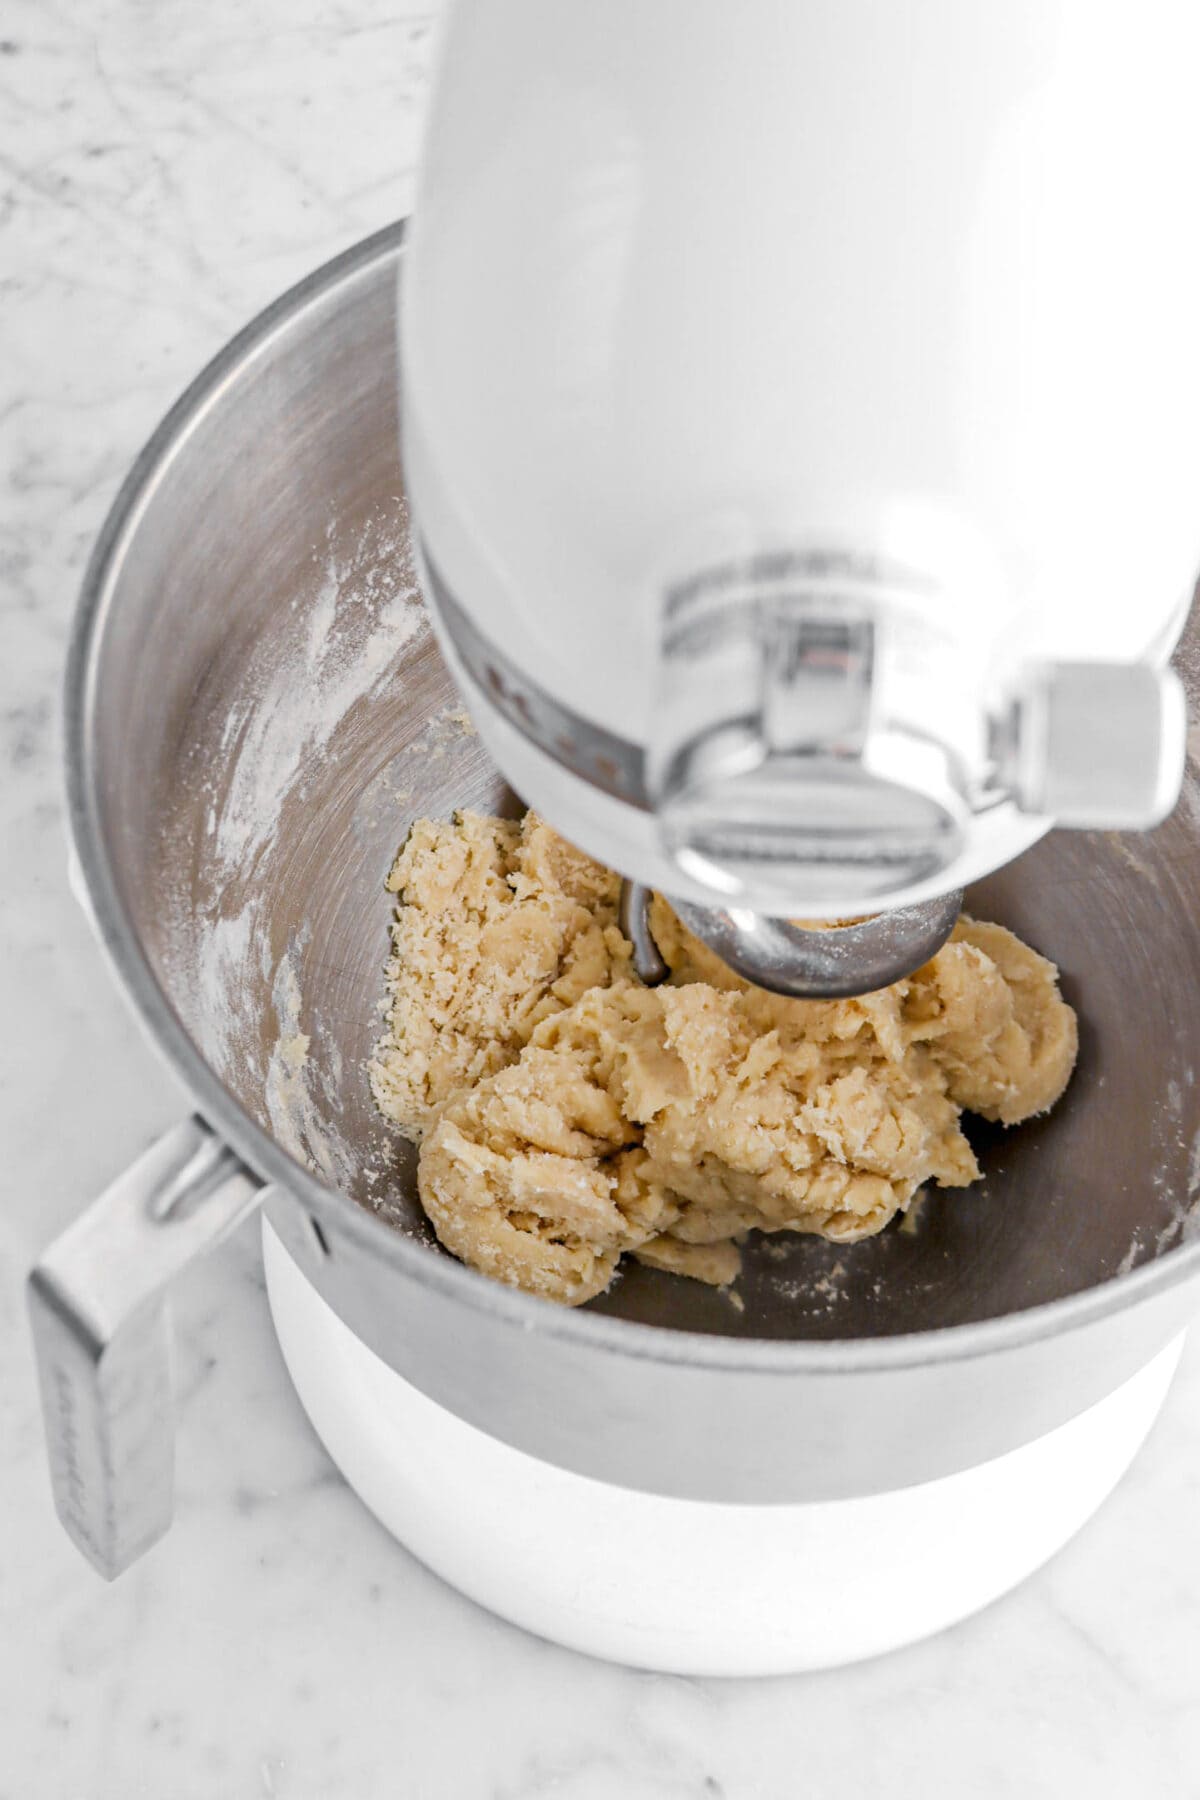 rough dough in stand mixer.